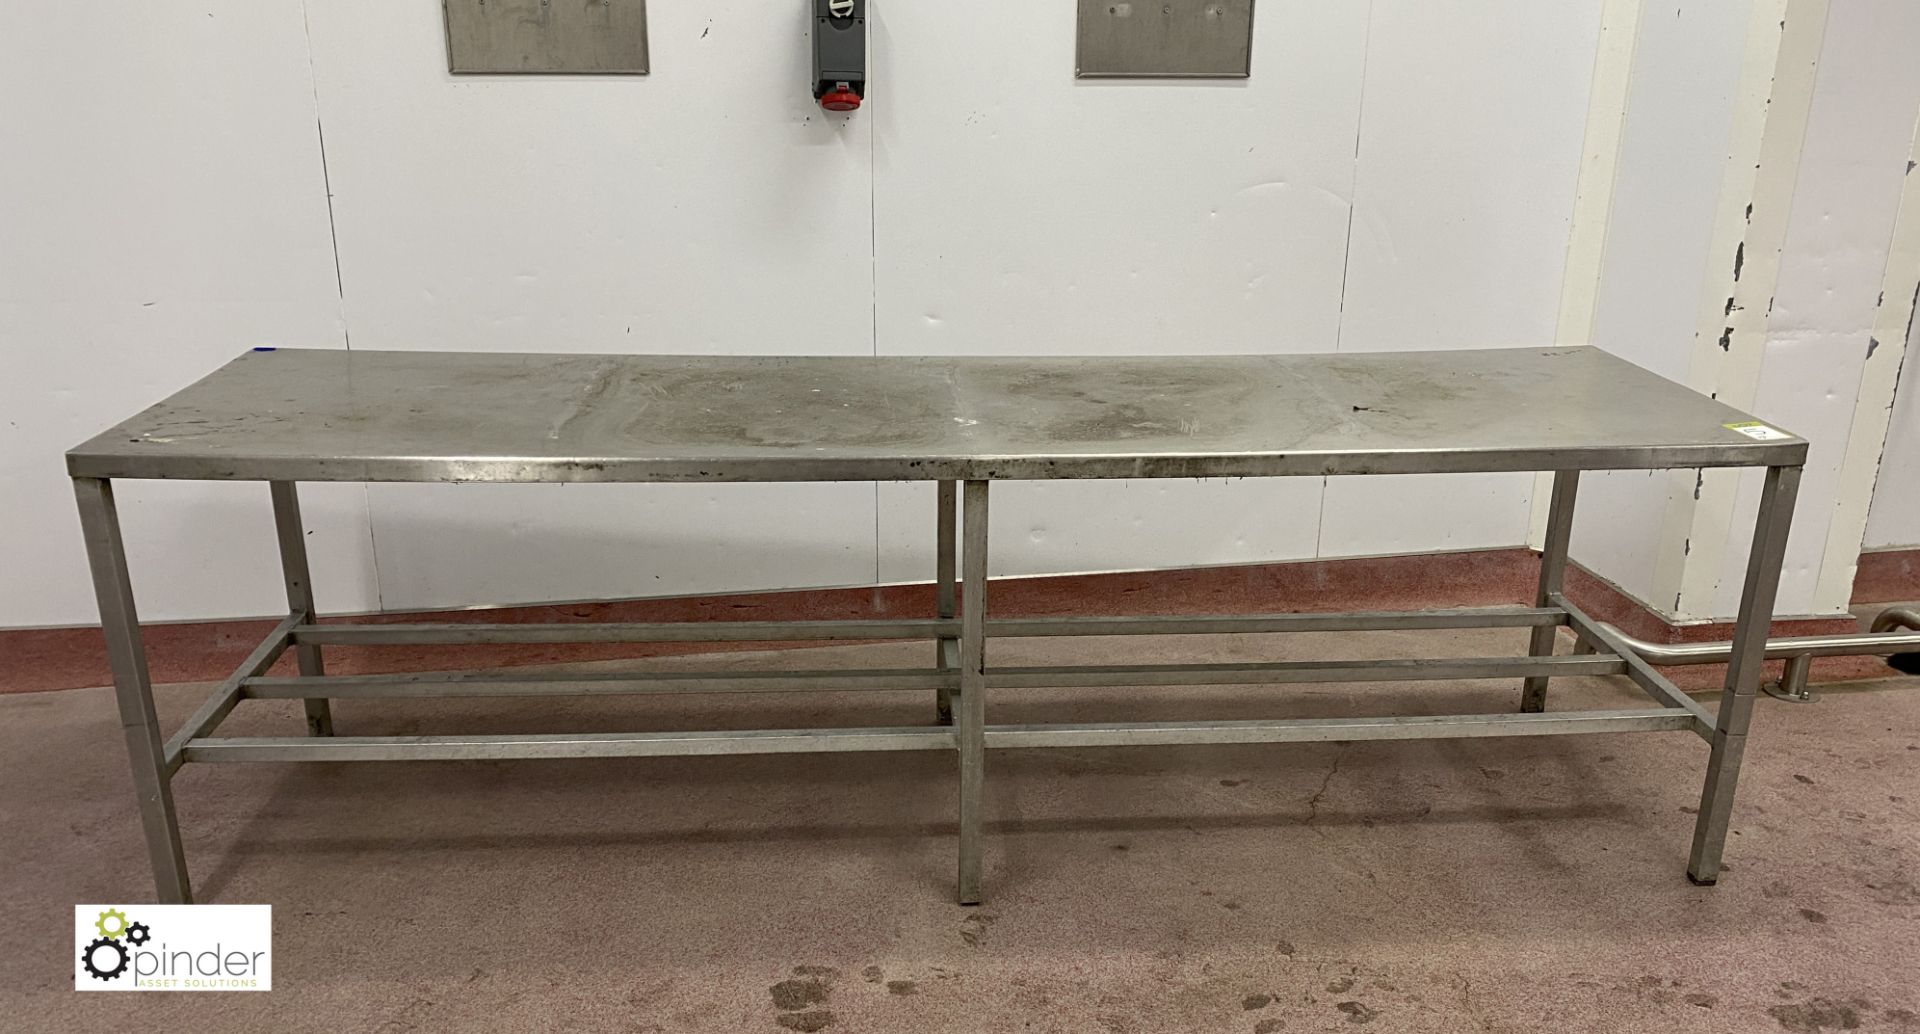 Stainless steel Preparation Table, 2740mm x 770mm x 840mm (please note there is a lift out fee of £5